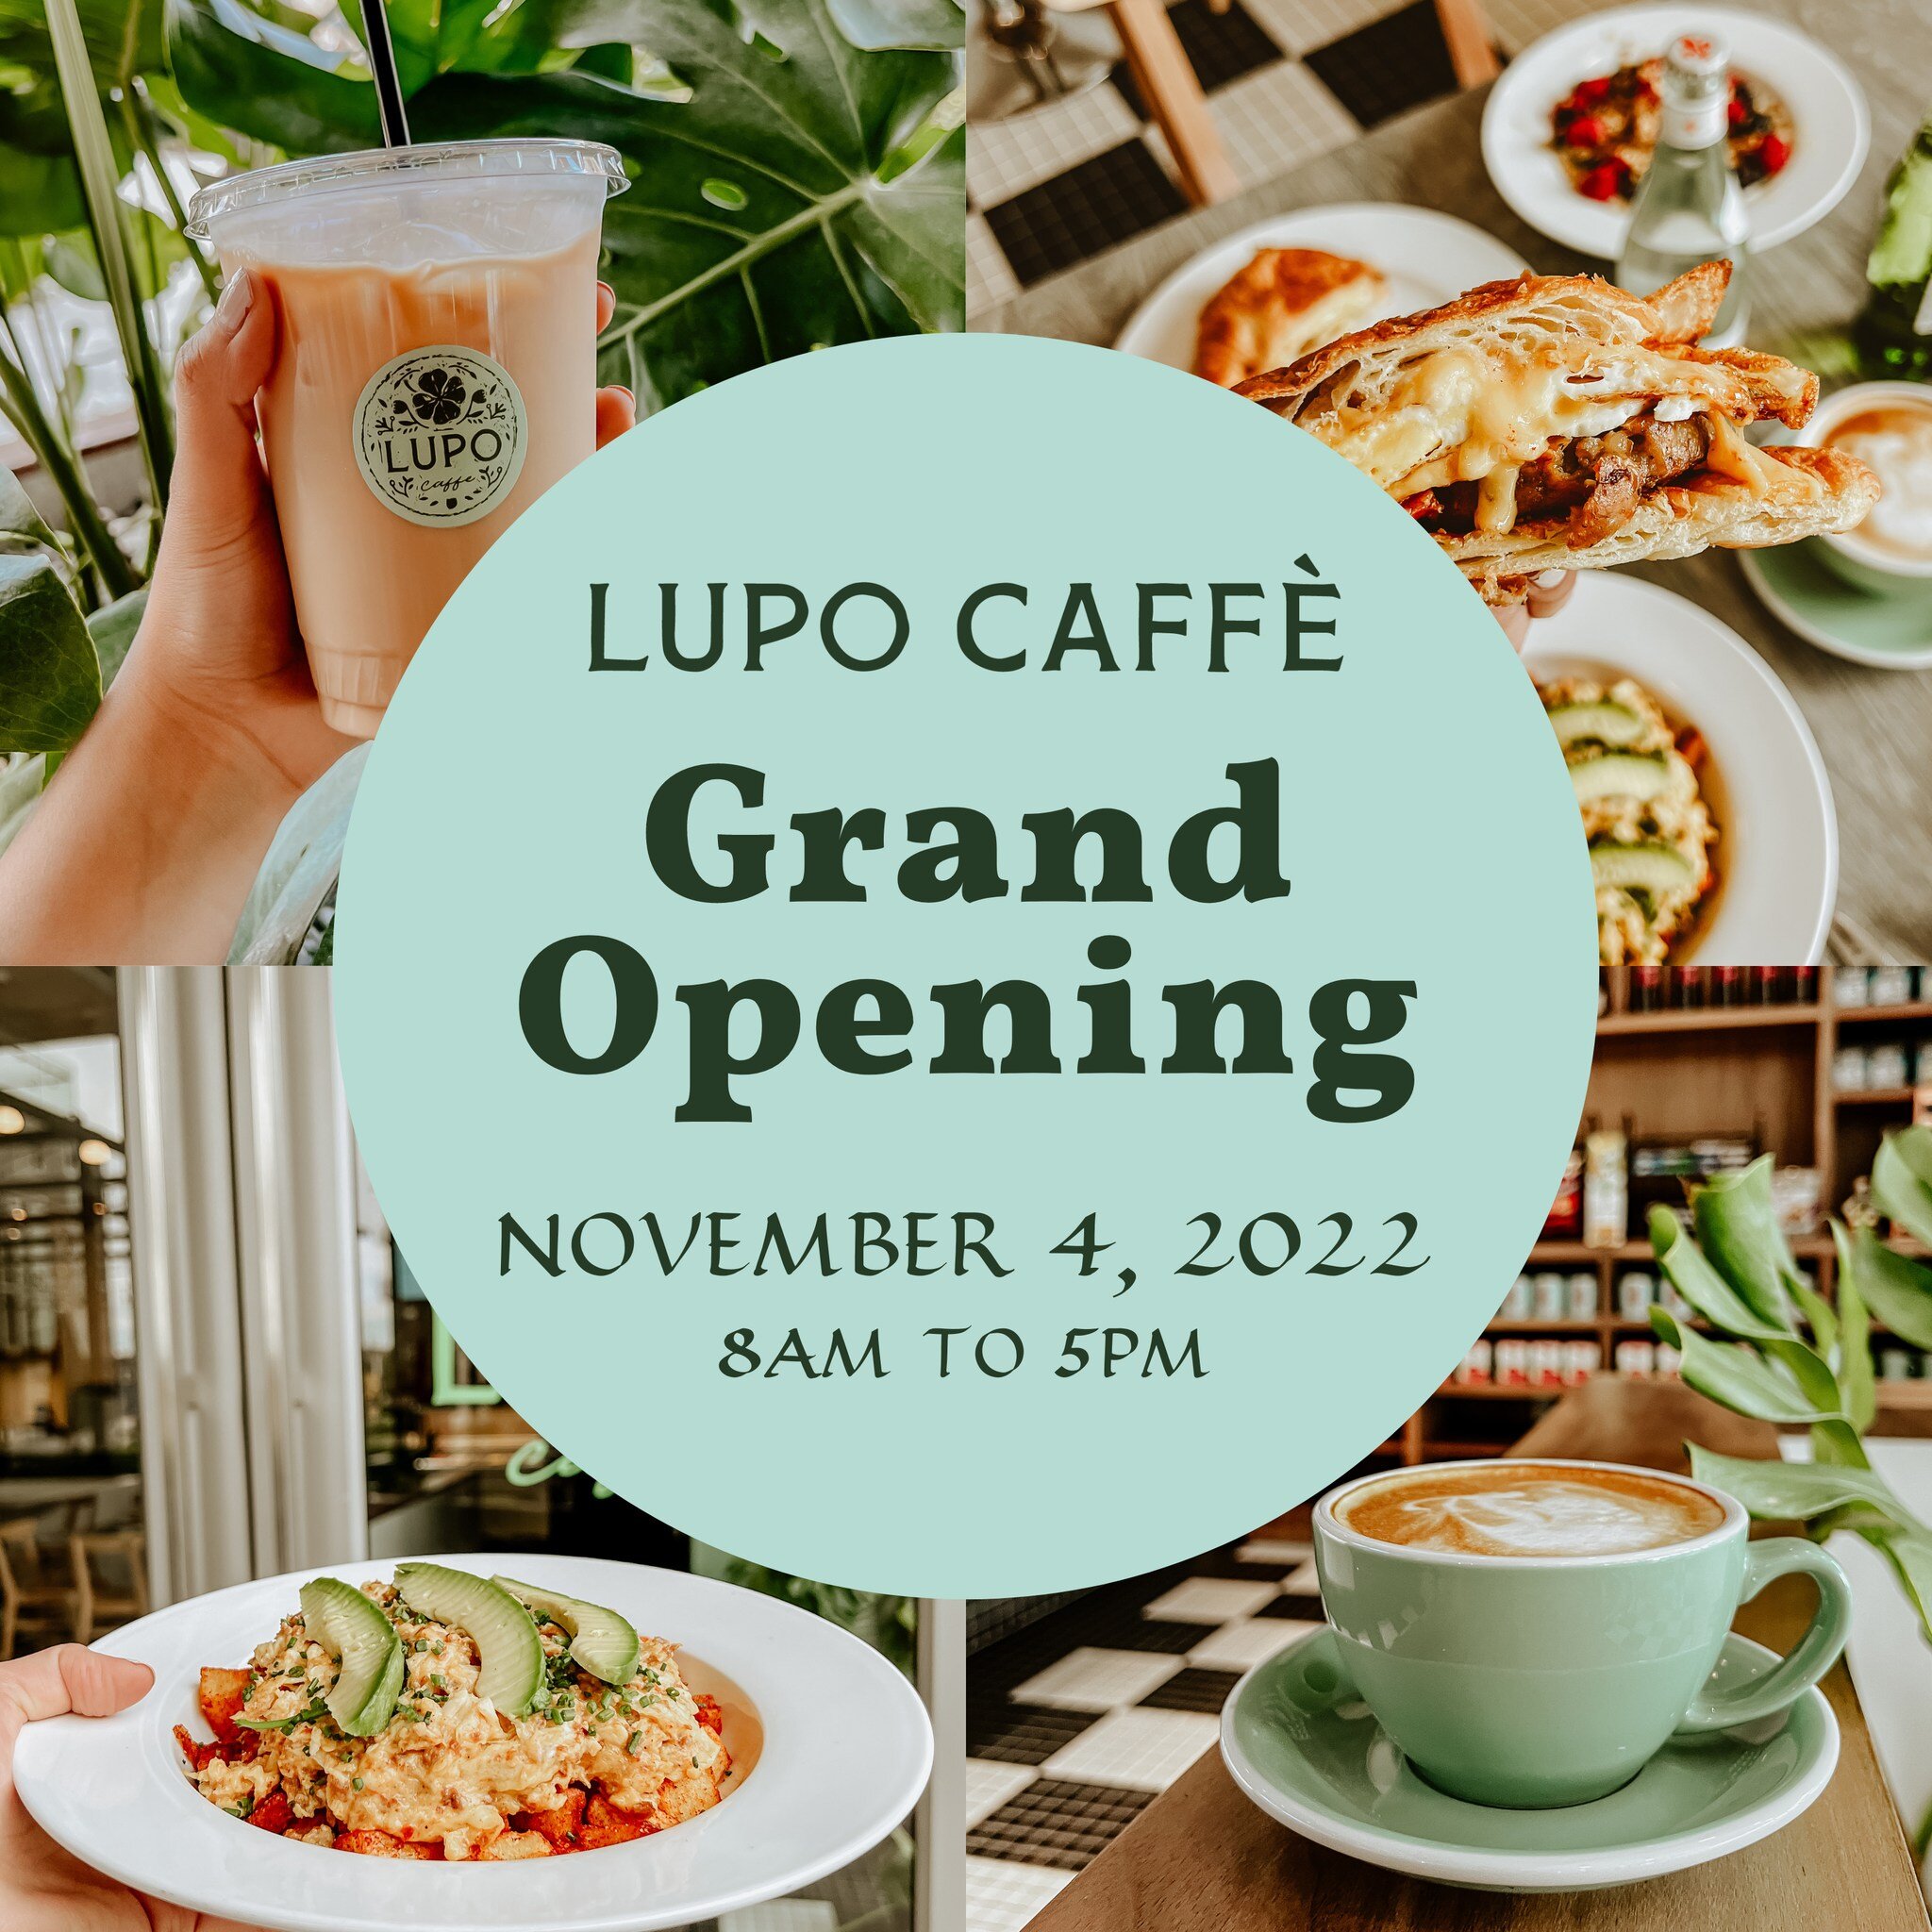 Join us one week from now for our Grand Opening! 

We are thrilled to be part of this community and excited to share some delicious food with you. Visit us on November 4th from 8am to 5pm! Can't wait to see you there!🍀☕